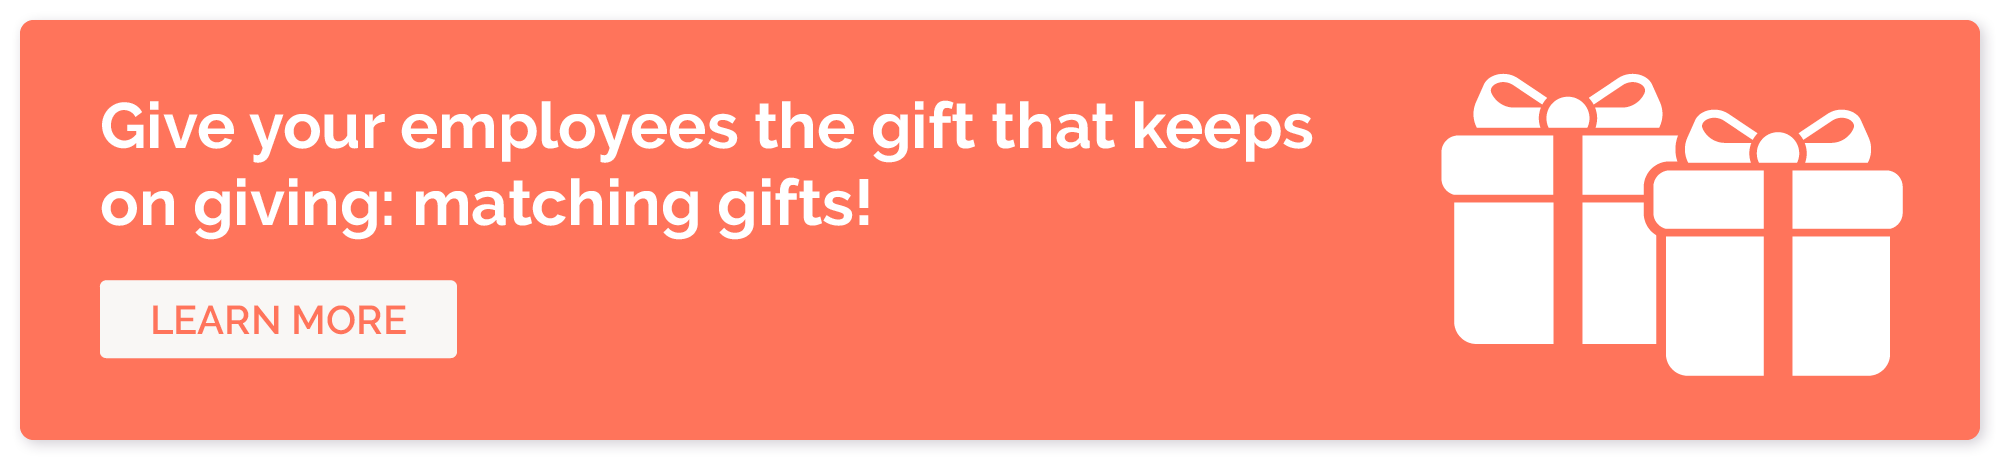 Learn about matching gifts, which is the best gift your company can give that aligns with corporate gift-giving laws.